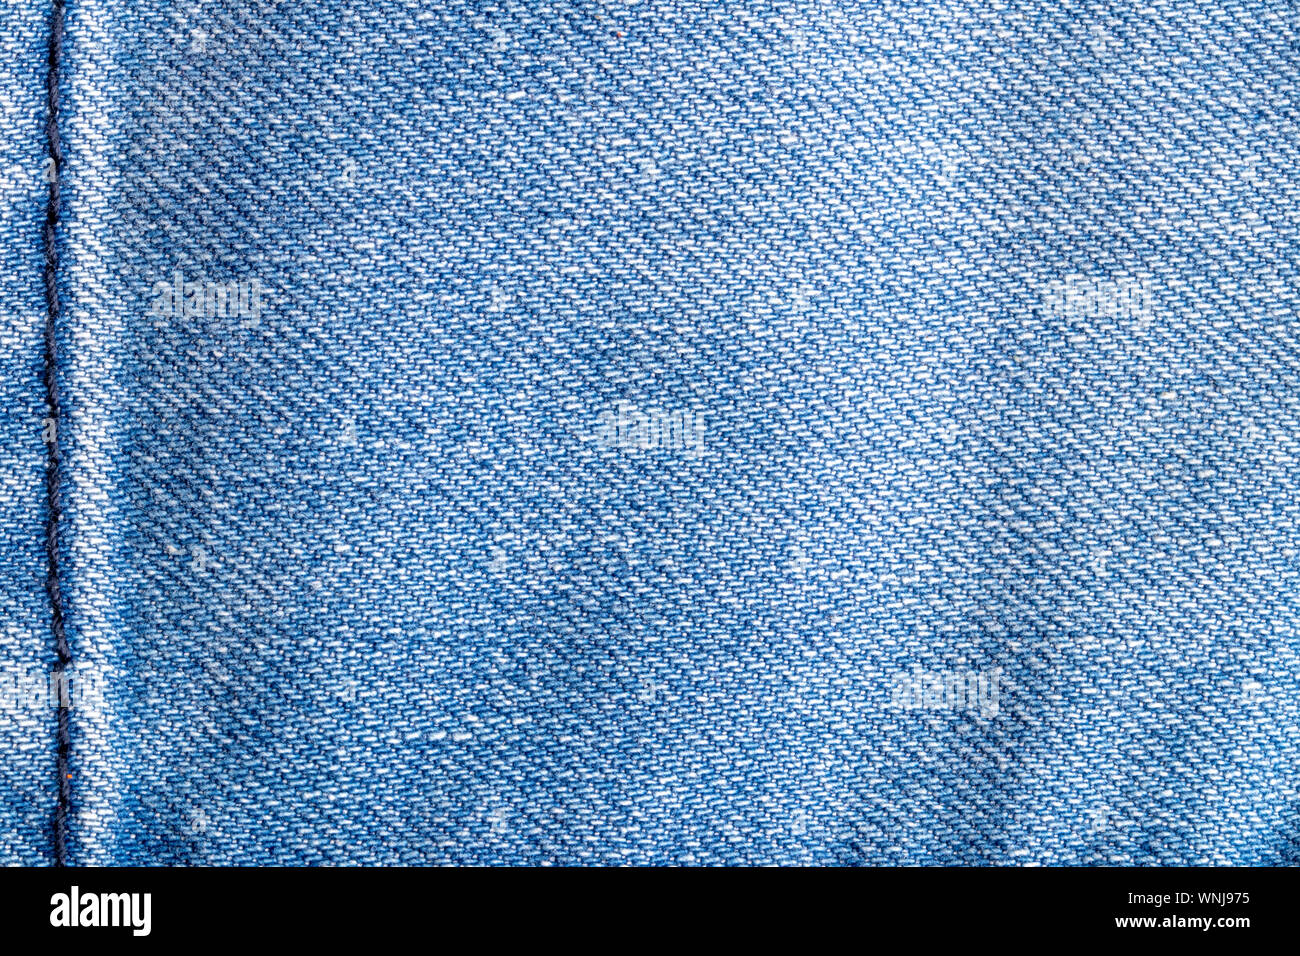 Denim Background Texture Close Up Of Details Of Empty Light Blue Jeans Fabric Jean Surface With Dark Blue Vertical Seam On Left Side Macro Top Vie Stock Photo Alamy